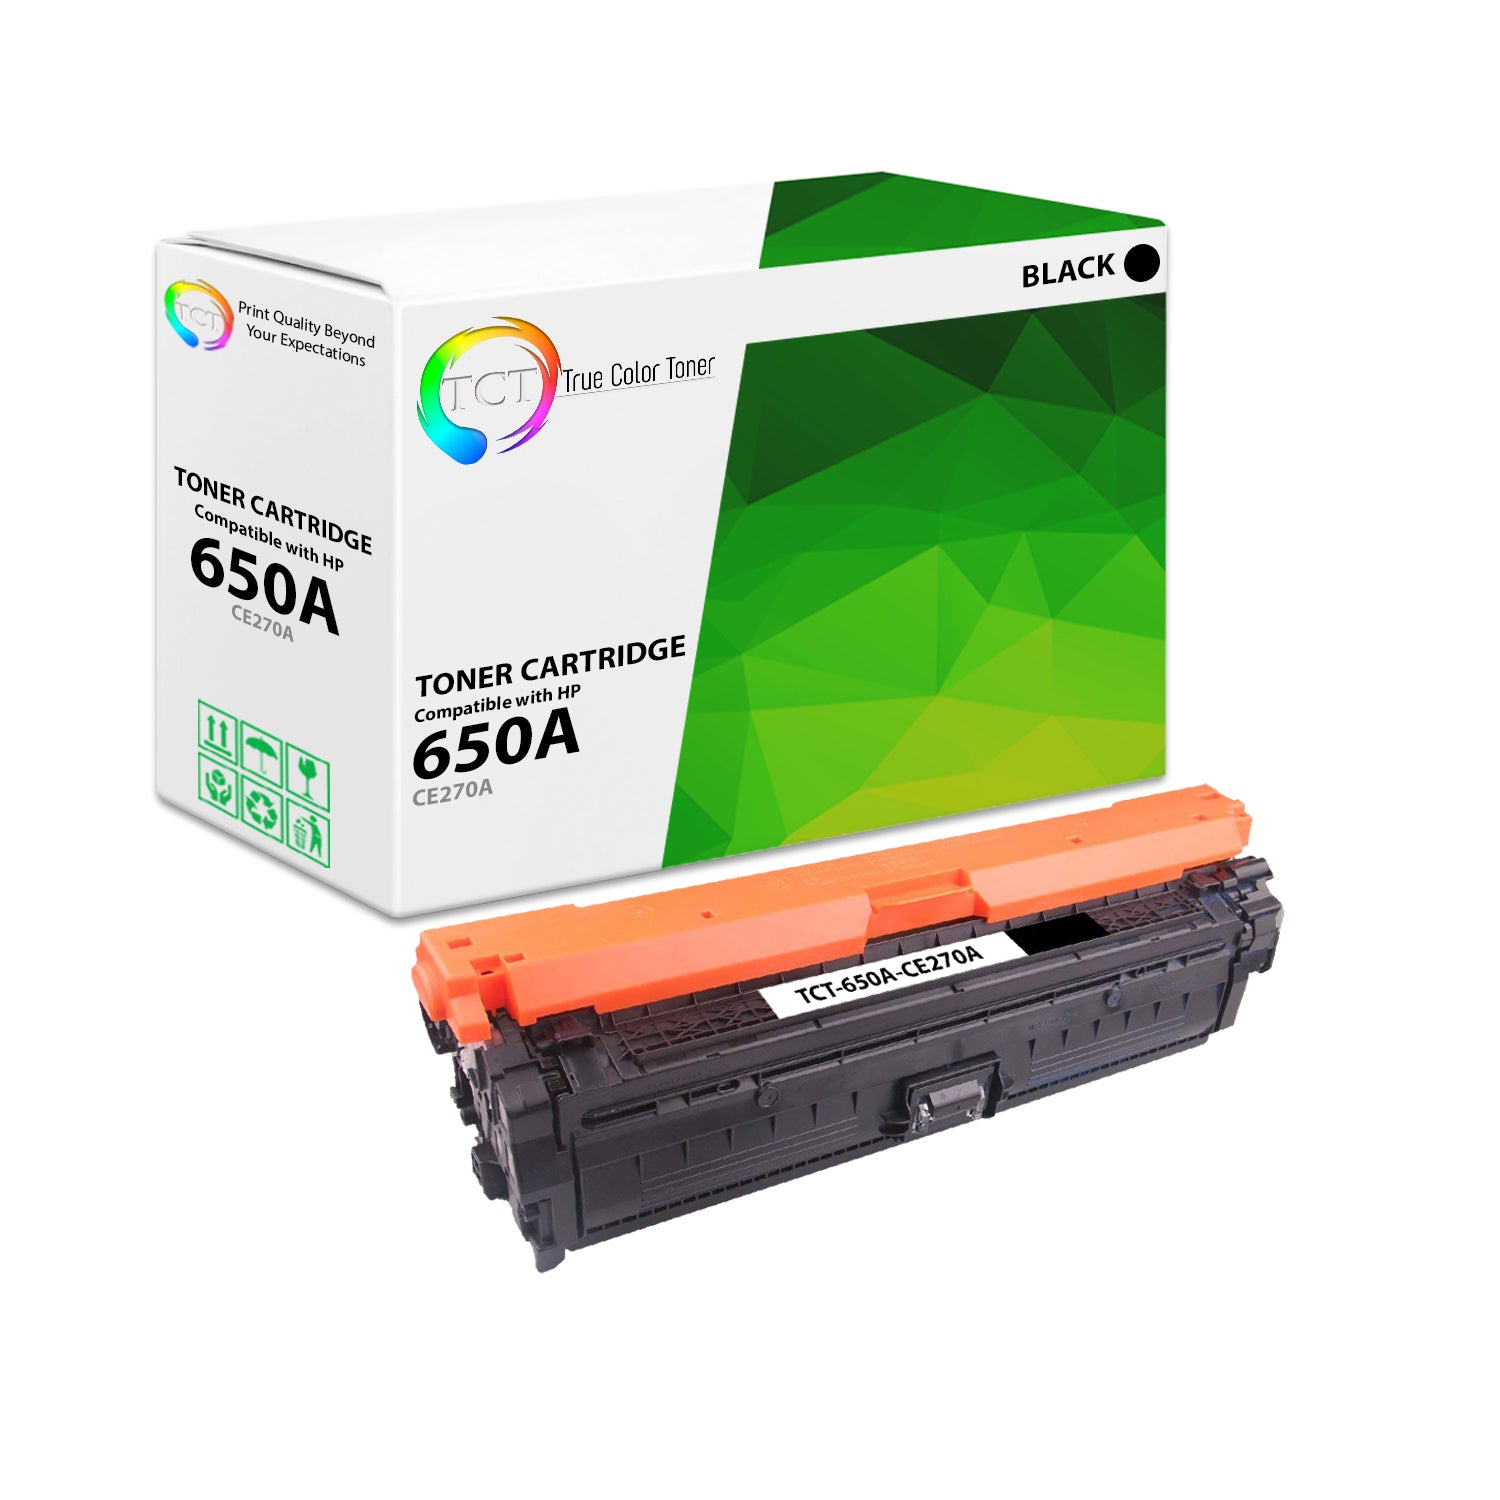 TCT Compatible Toner Cartridge Replacement for the HP 650A Series - 1 Pack Black